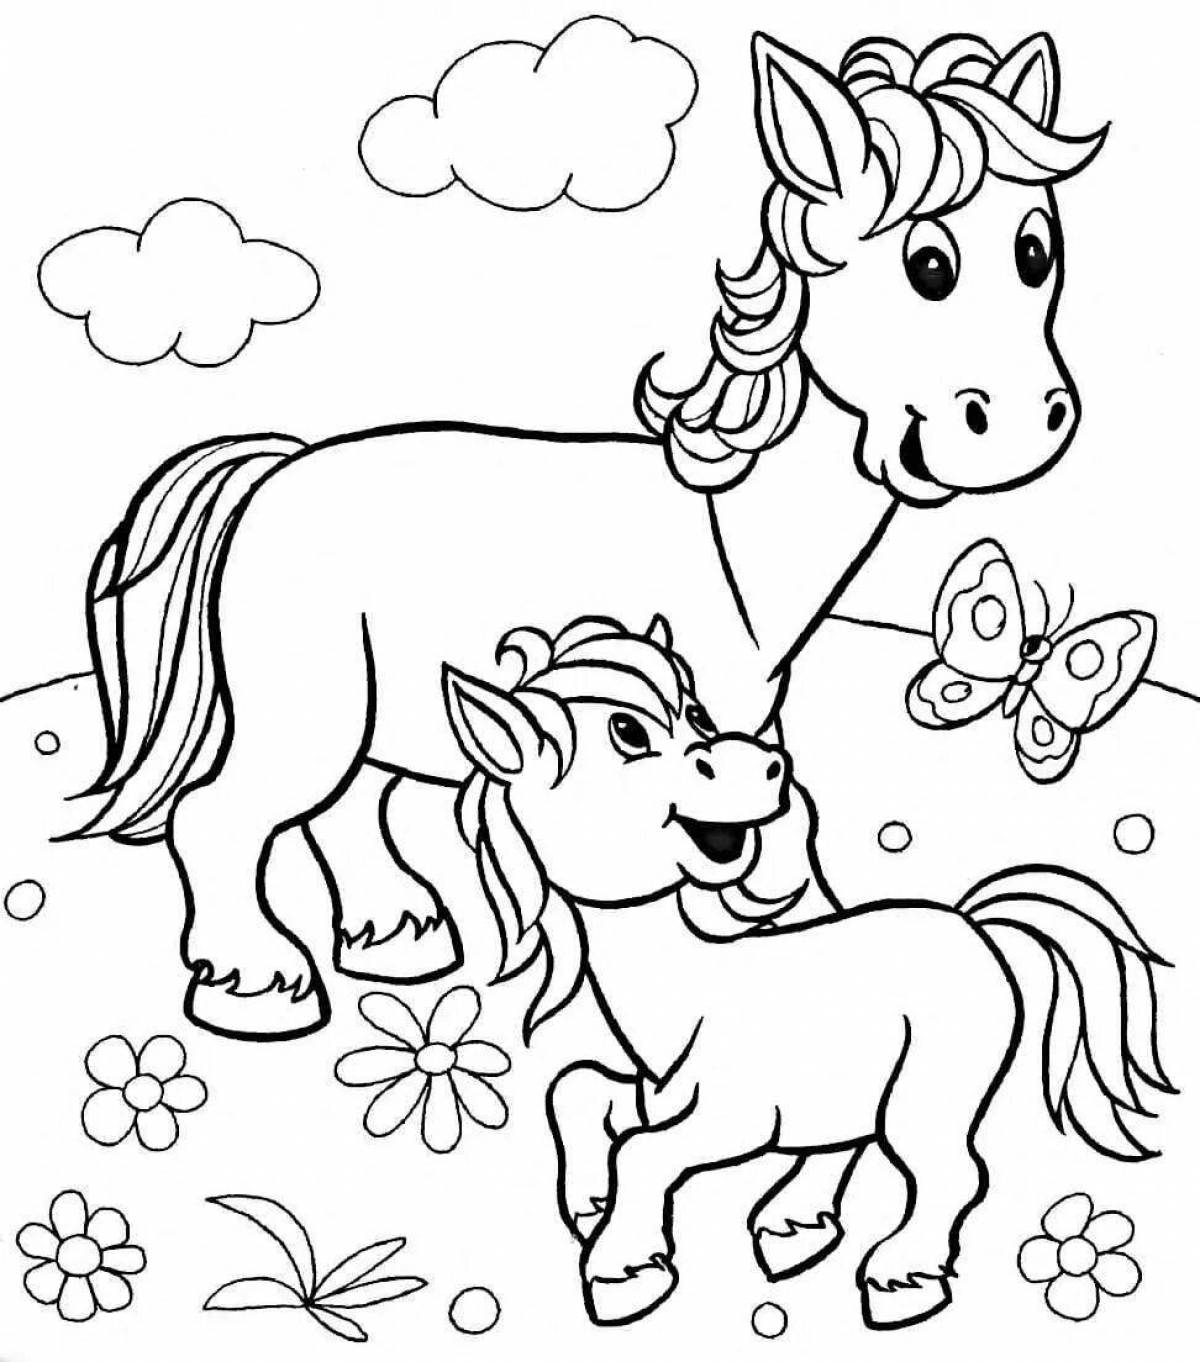 Great coloring book pets for kids 5-7 years old